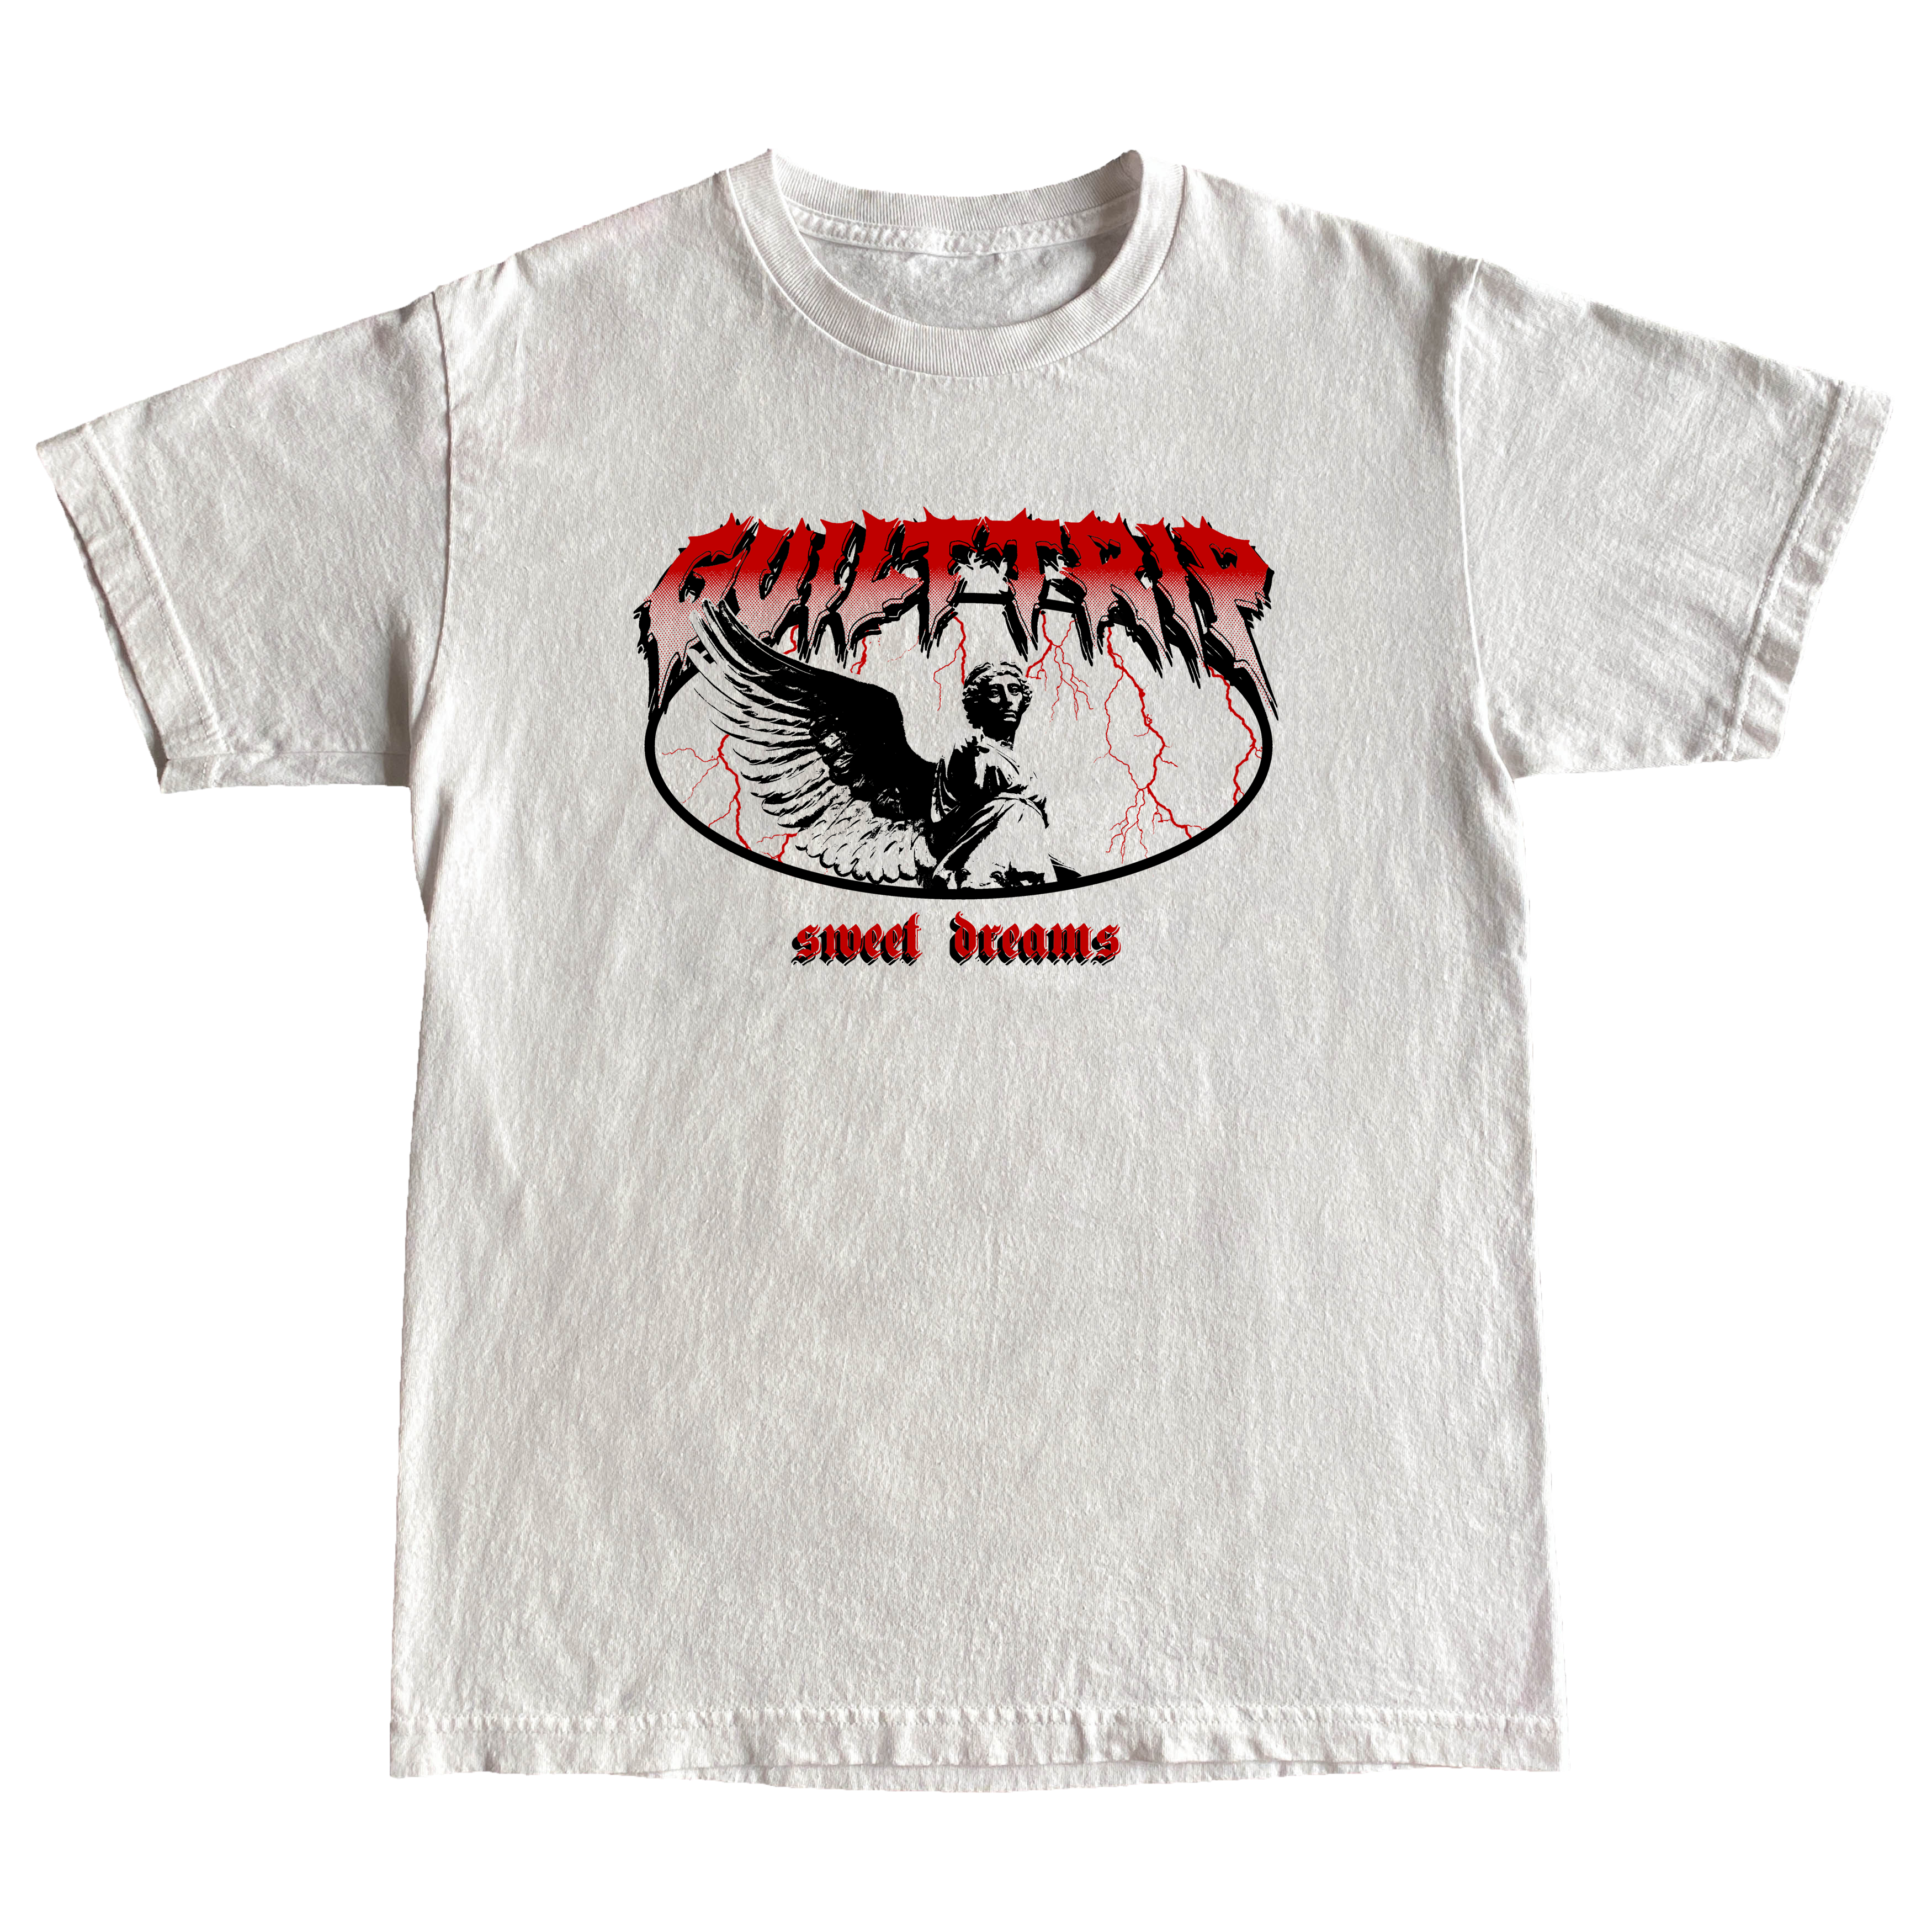 Guilt Trip White/Red Tee